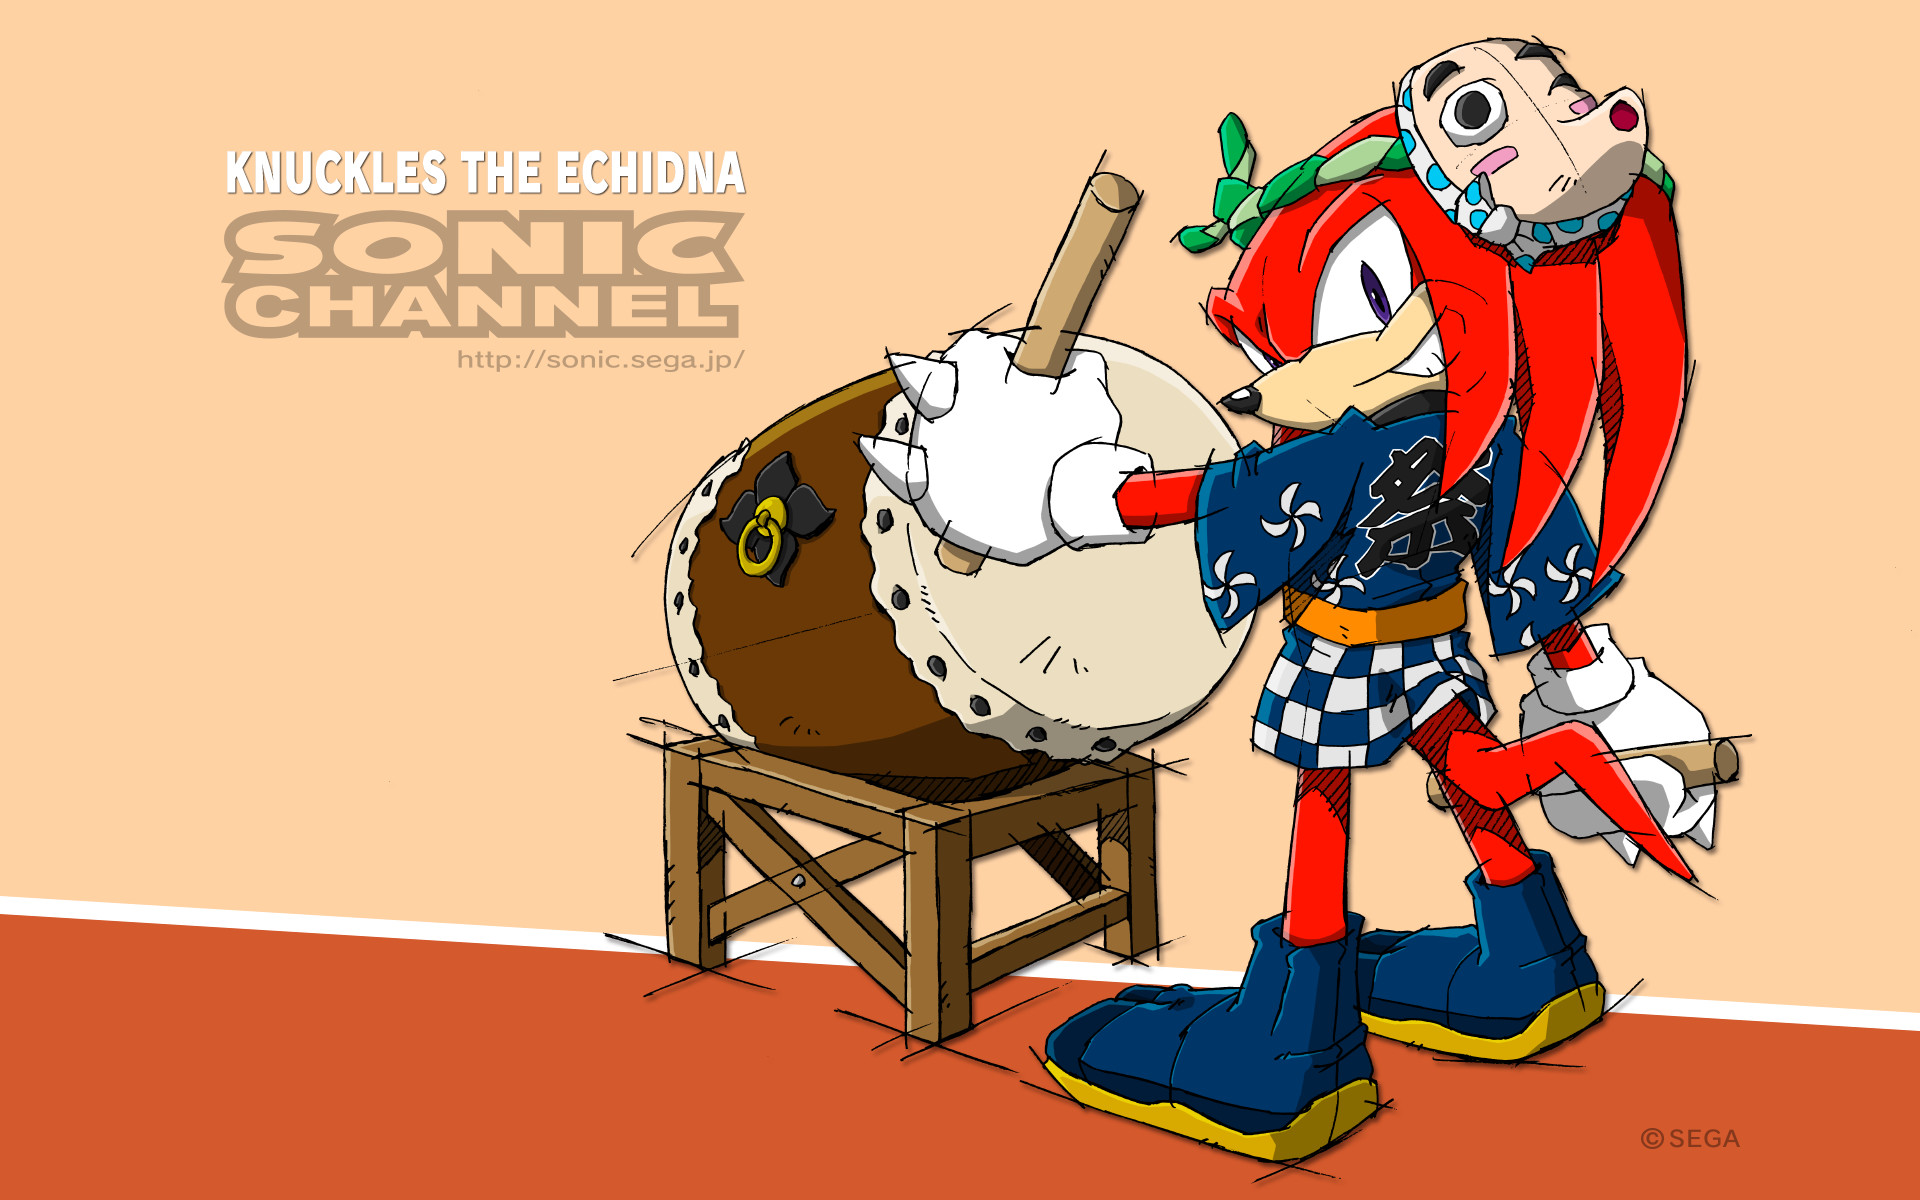 1920x1200 2015/08 - Knuckles the Echidna